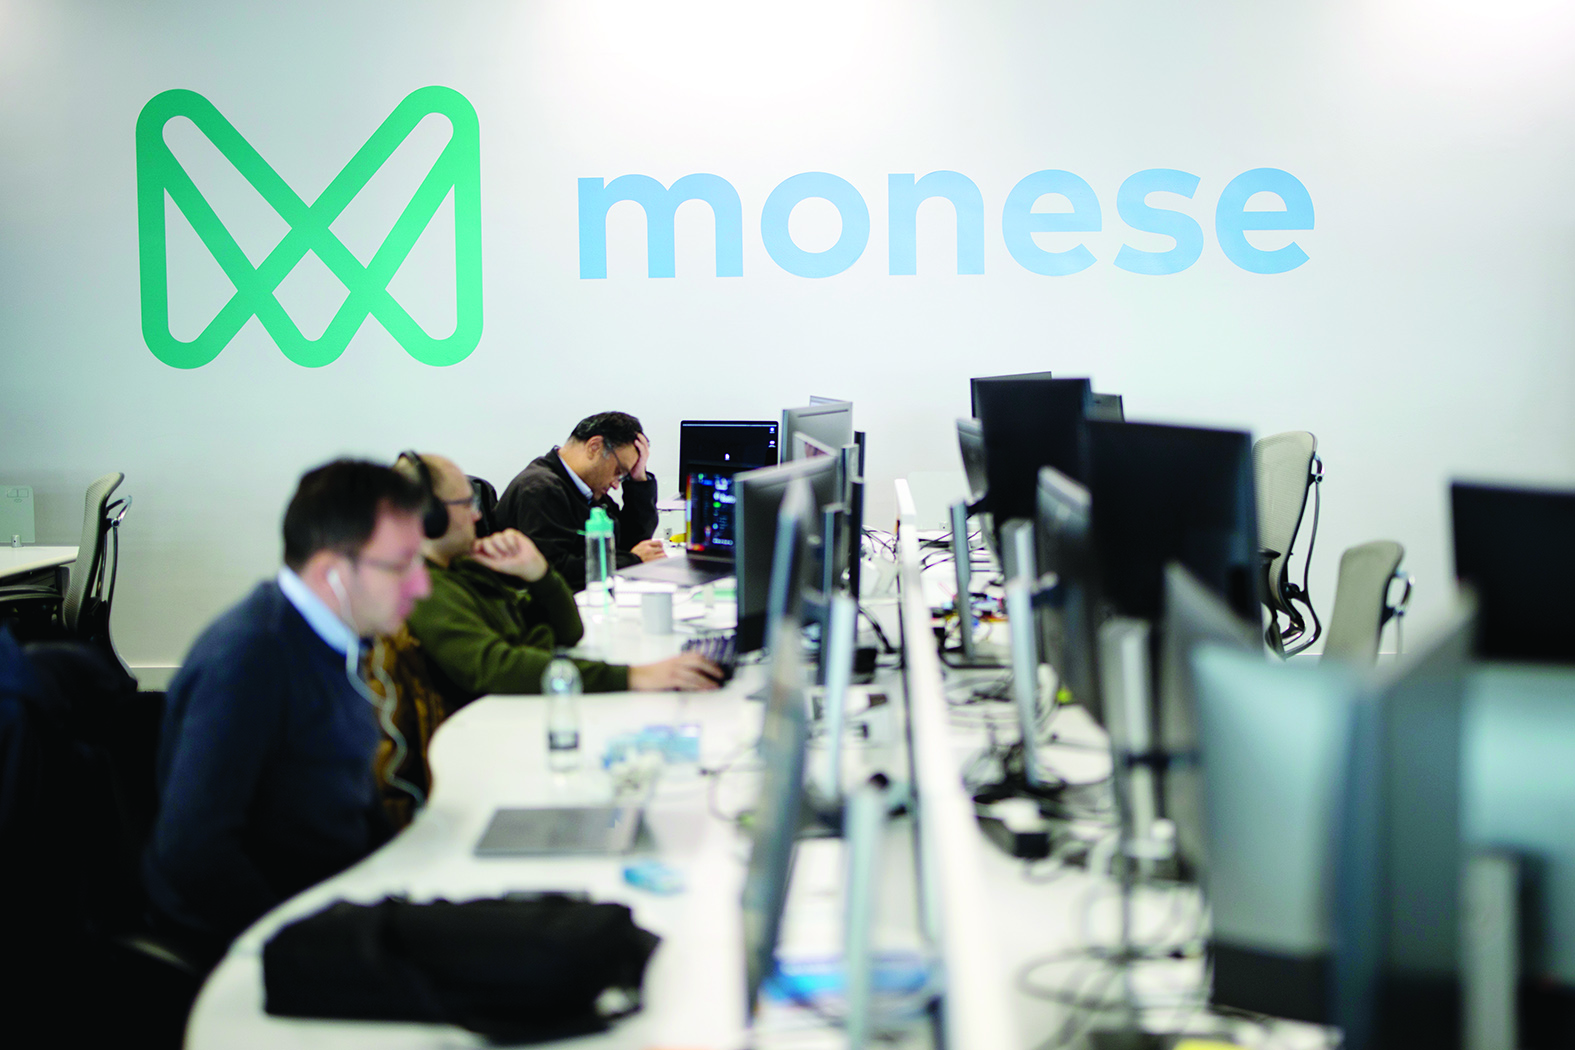 Employees of mobile phone app-based 'neo-bank', Monese work at Monese offices in London on February 7, 2020. - Among Britain's digital app-based challenger banks that increasingly attract city-dwelling rich millennials is Monese, that is wooing customers also long neglected by the country's established lenders.  Koppel's lender Monese has expanded to 31 nations in Europe with two million customers in only five years of operation. (Photo by TOLGA AKMEN / AFP)